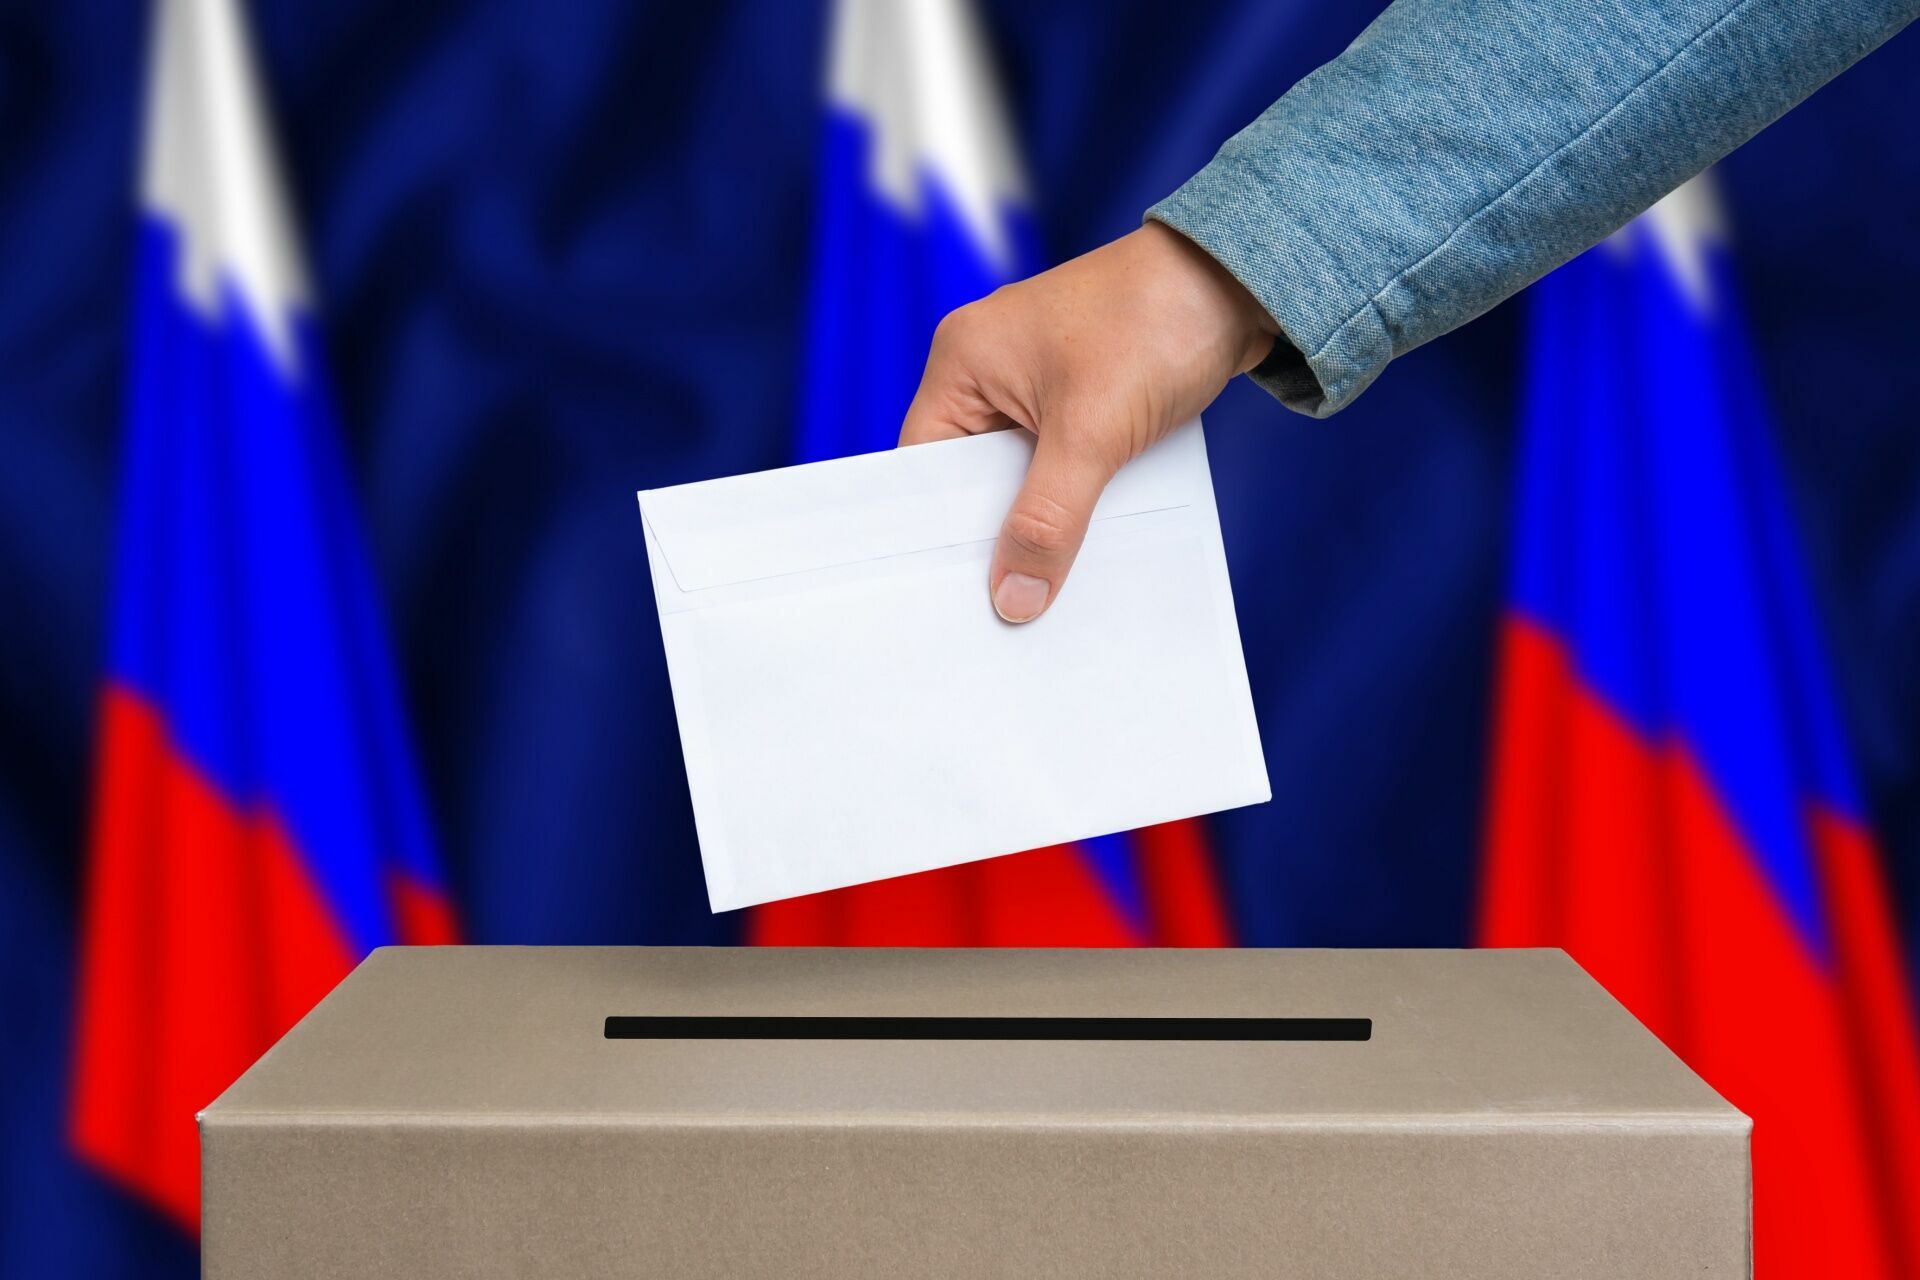 For 14 years, the Russian authorities did not admit 120 thousand candidates to the elections